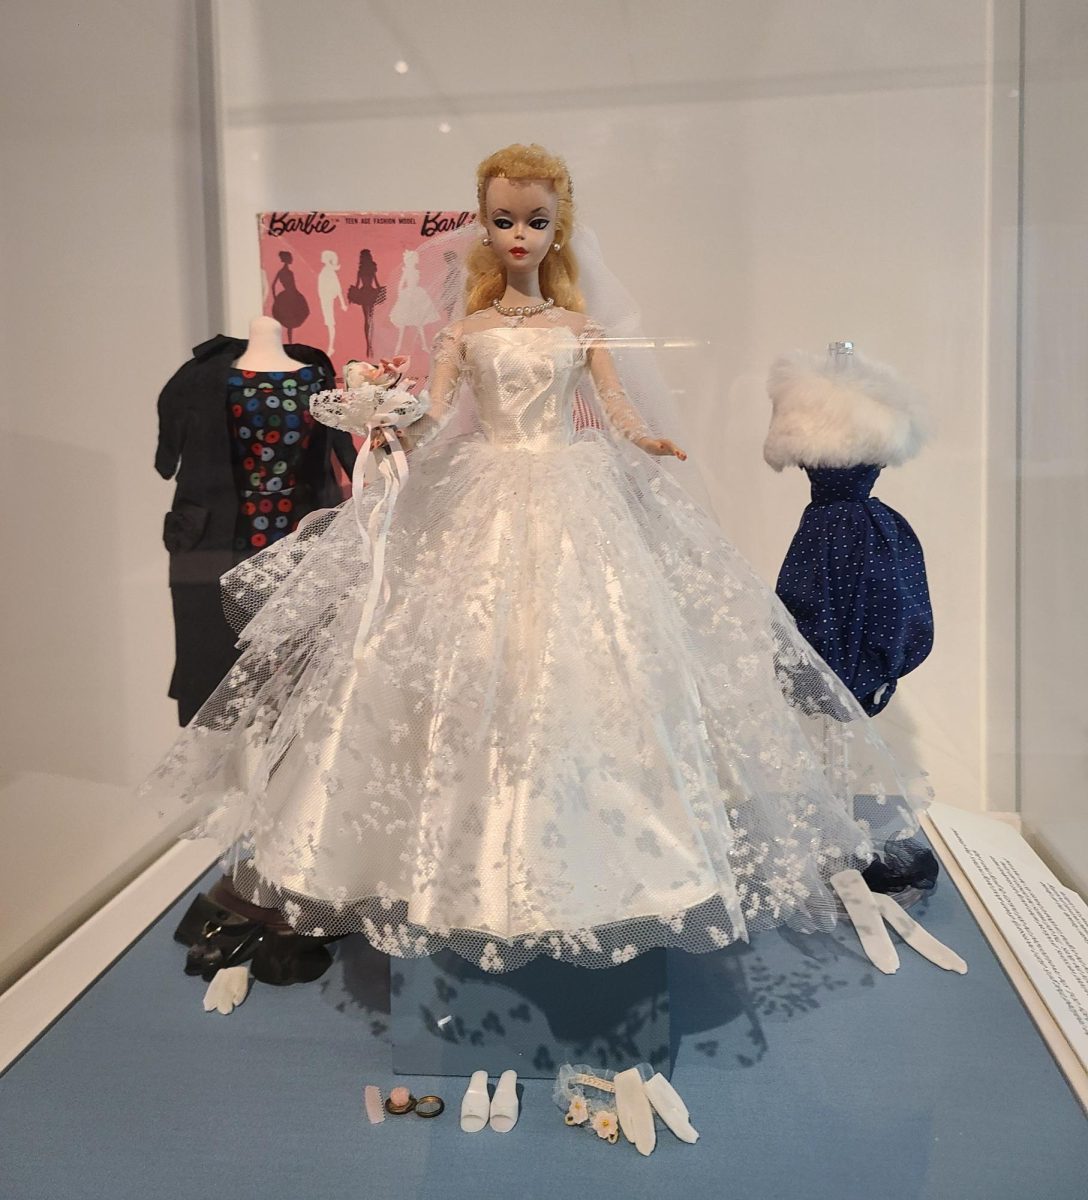 %231+Barbie+on+display+in+Gallery+4+at+the+Barry+Art+Museum.